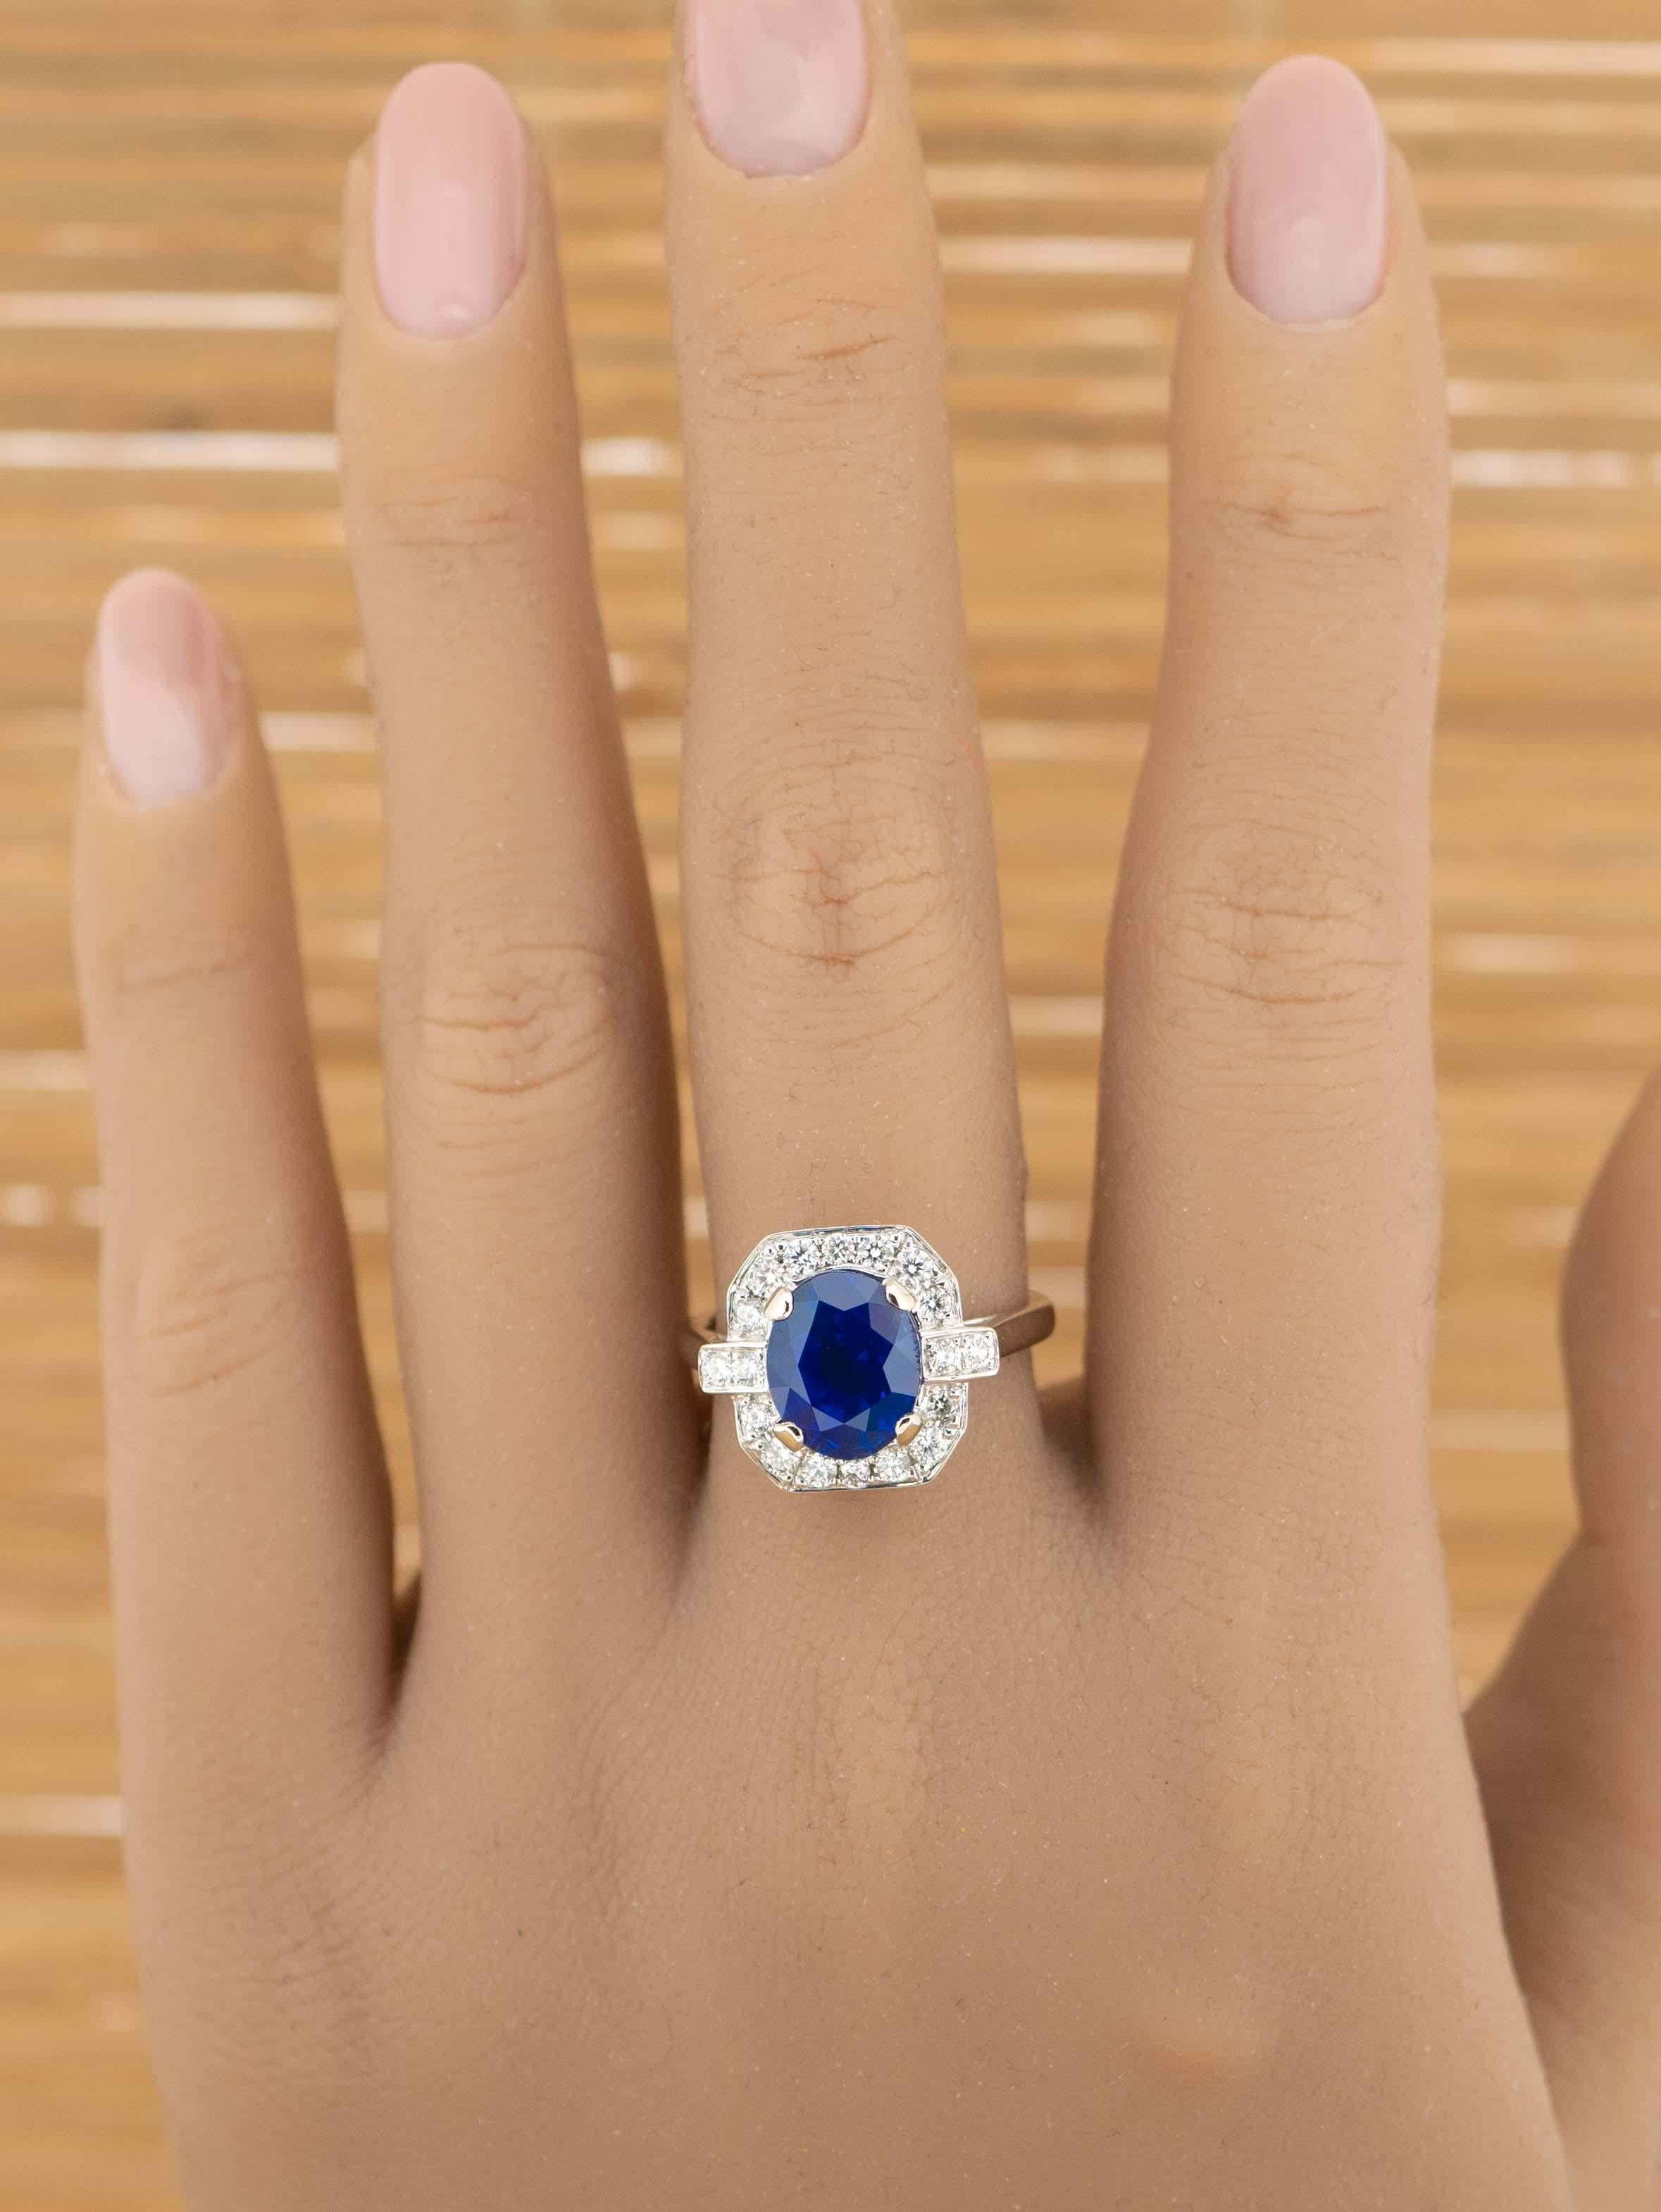 4,04ct Certified Oval Royal Blue Sapphire & 0,45ct Diamond 18ct White Gold Ring im Angebot 1